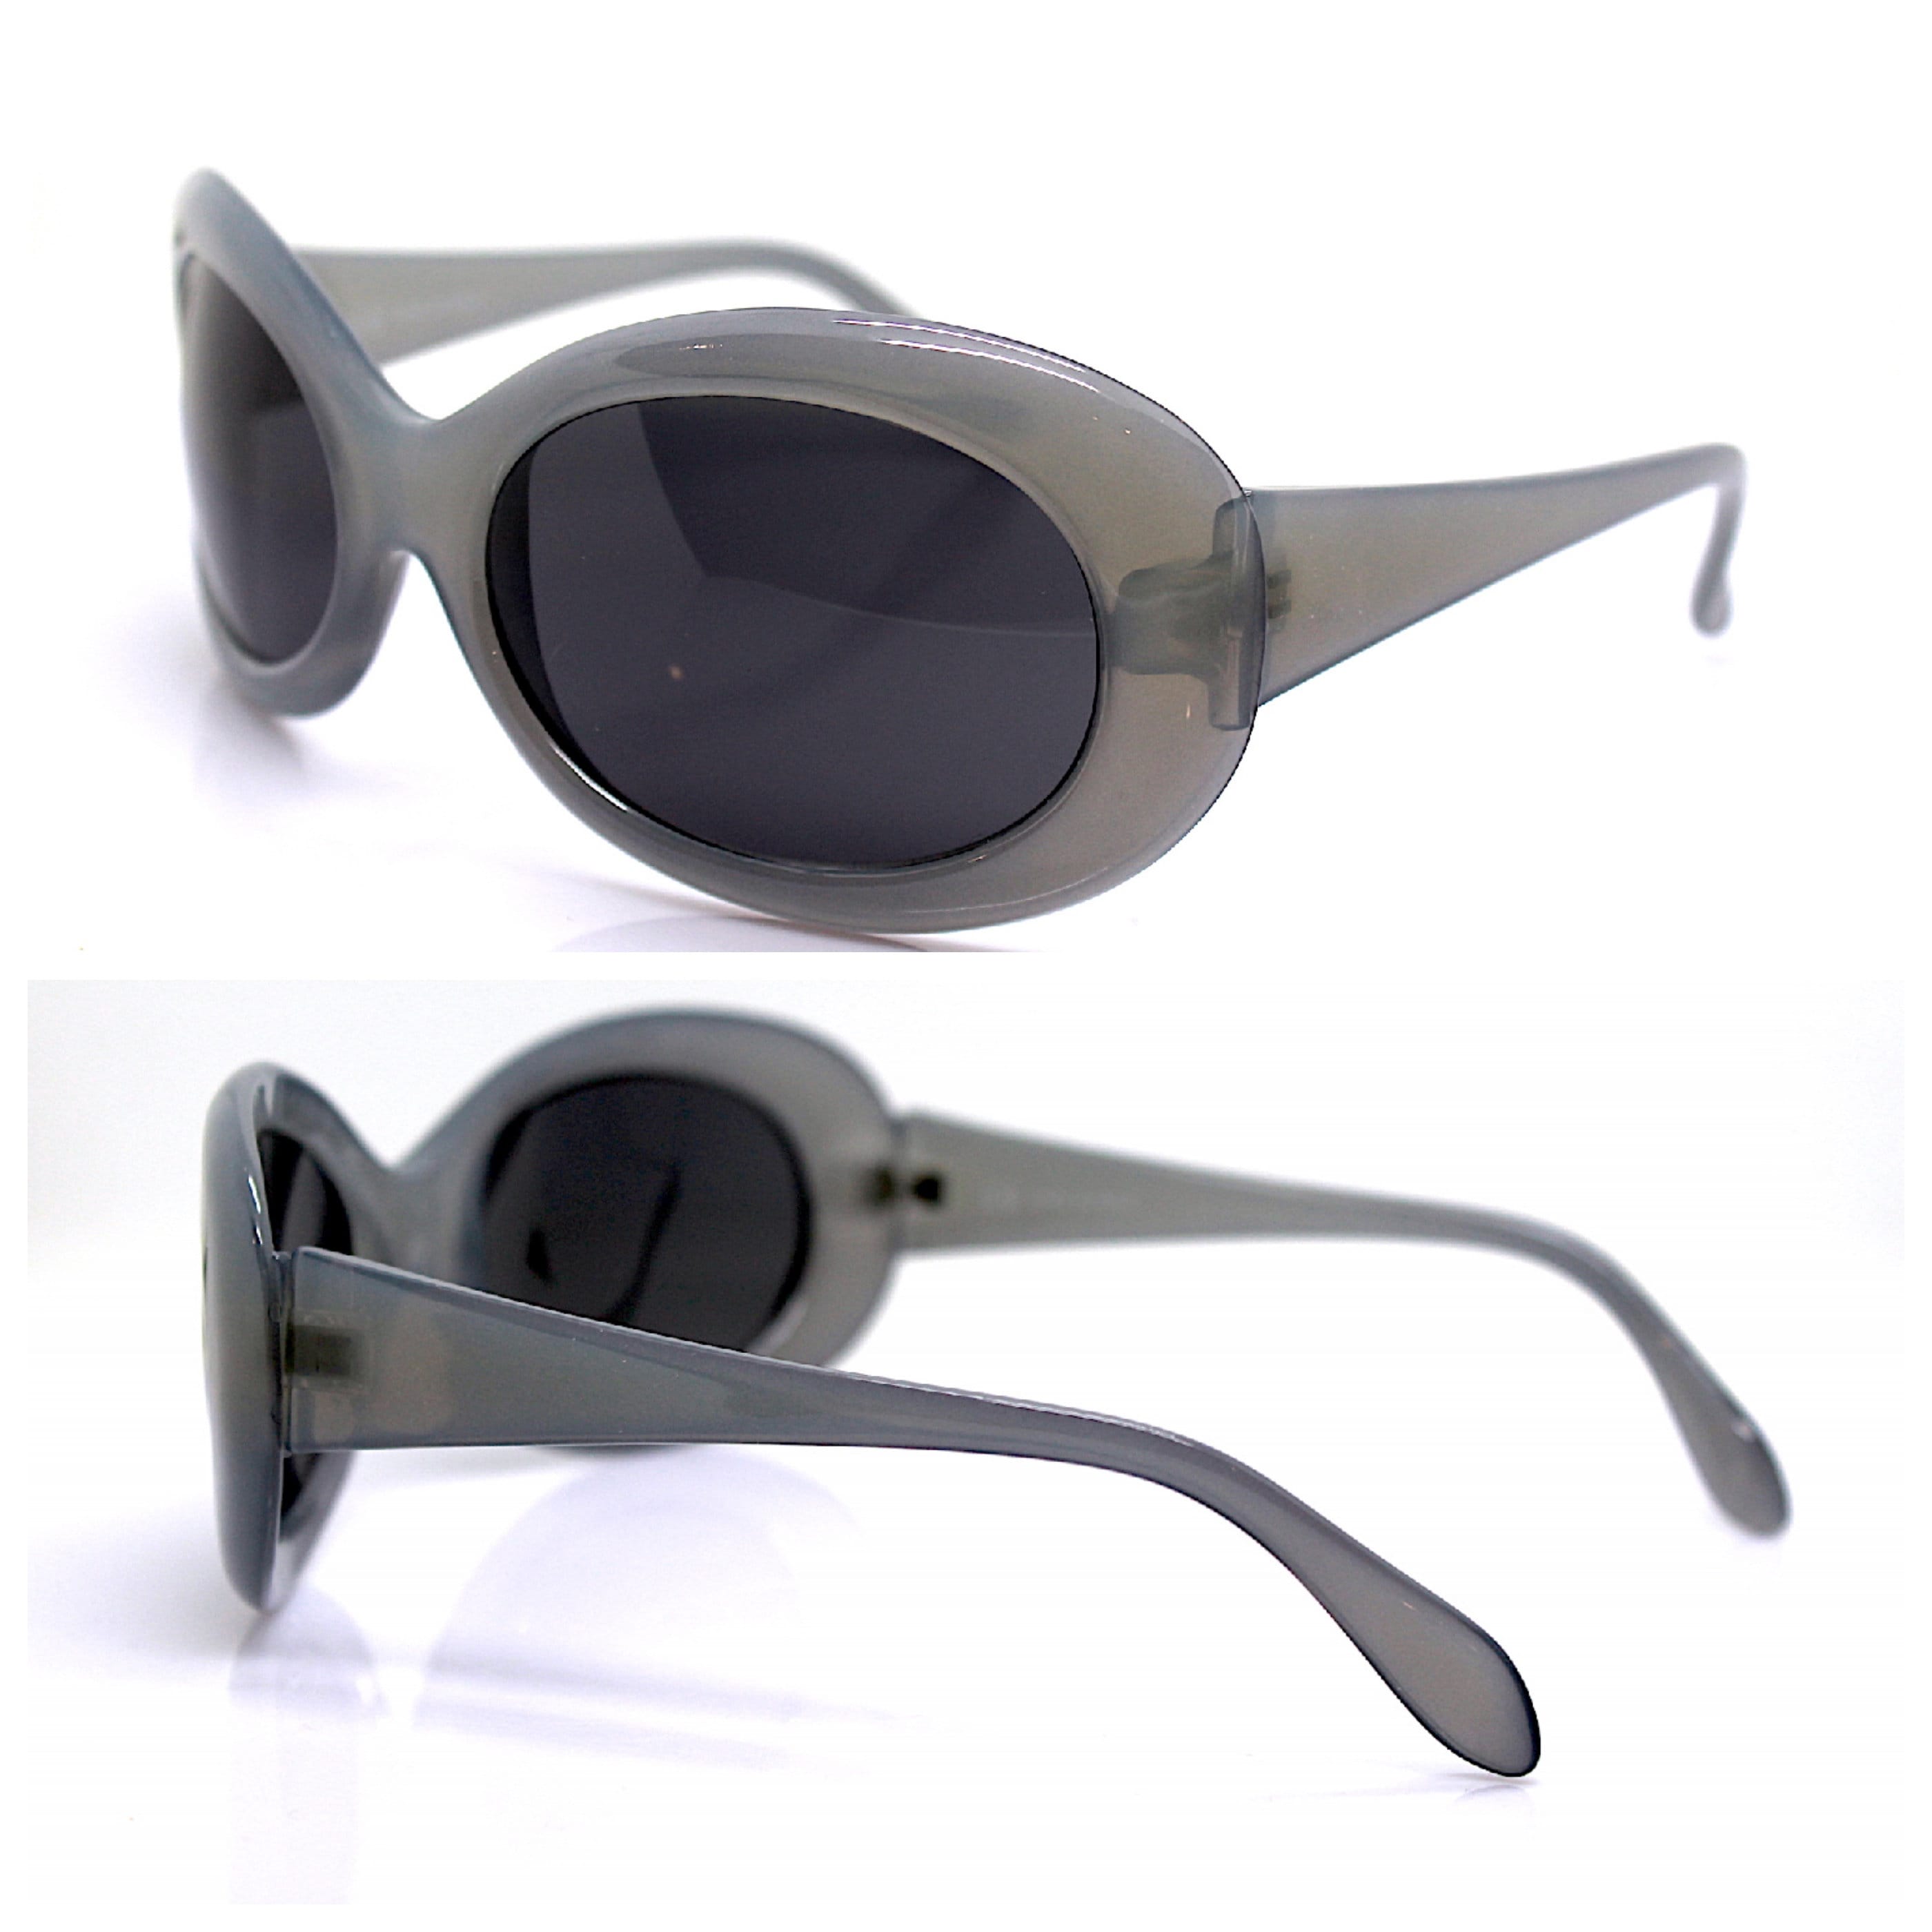 MADE IN ITALY Oversized Oval Wrap Sunglasses Woman Man Gray Frame